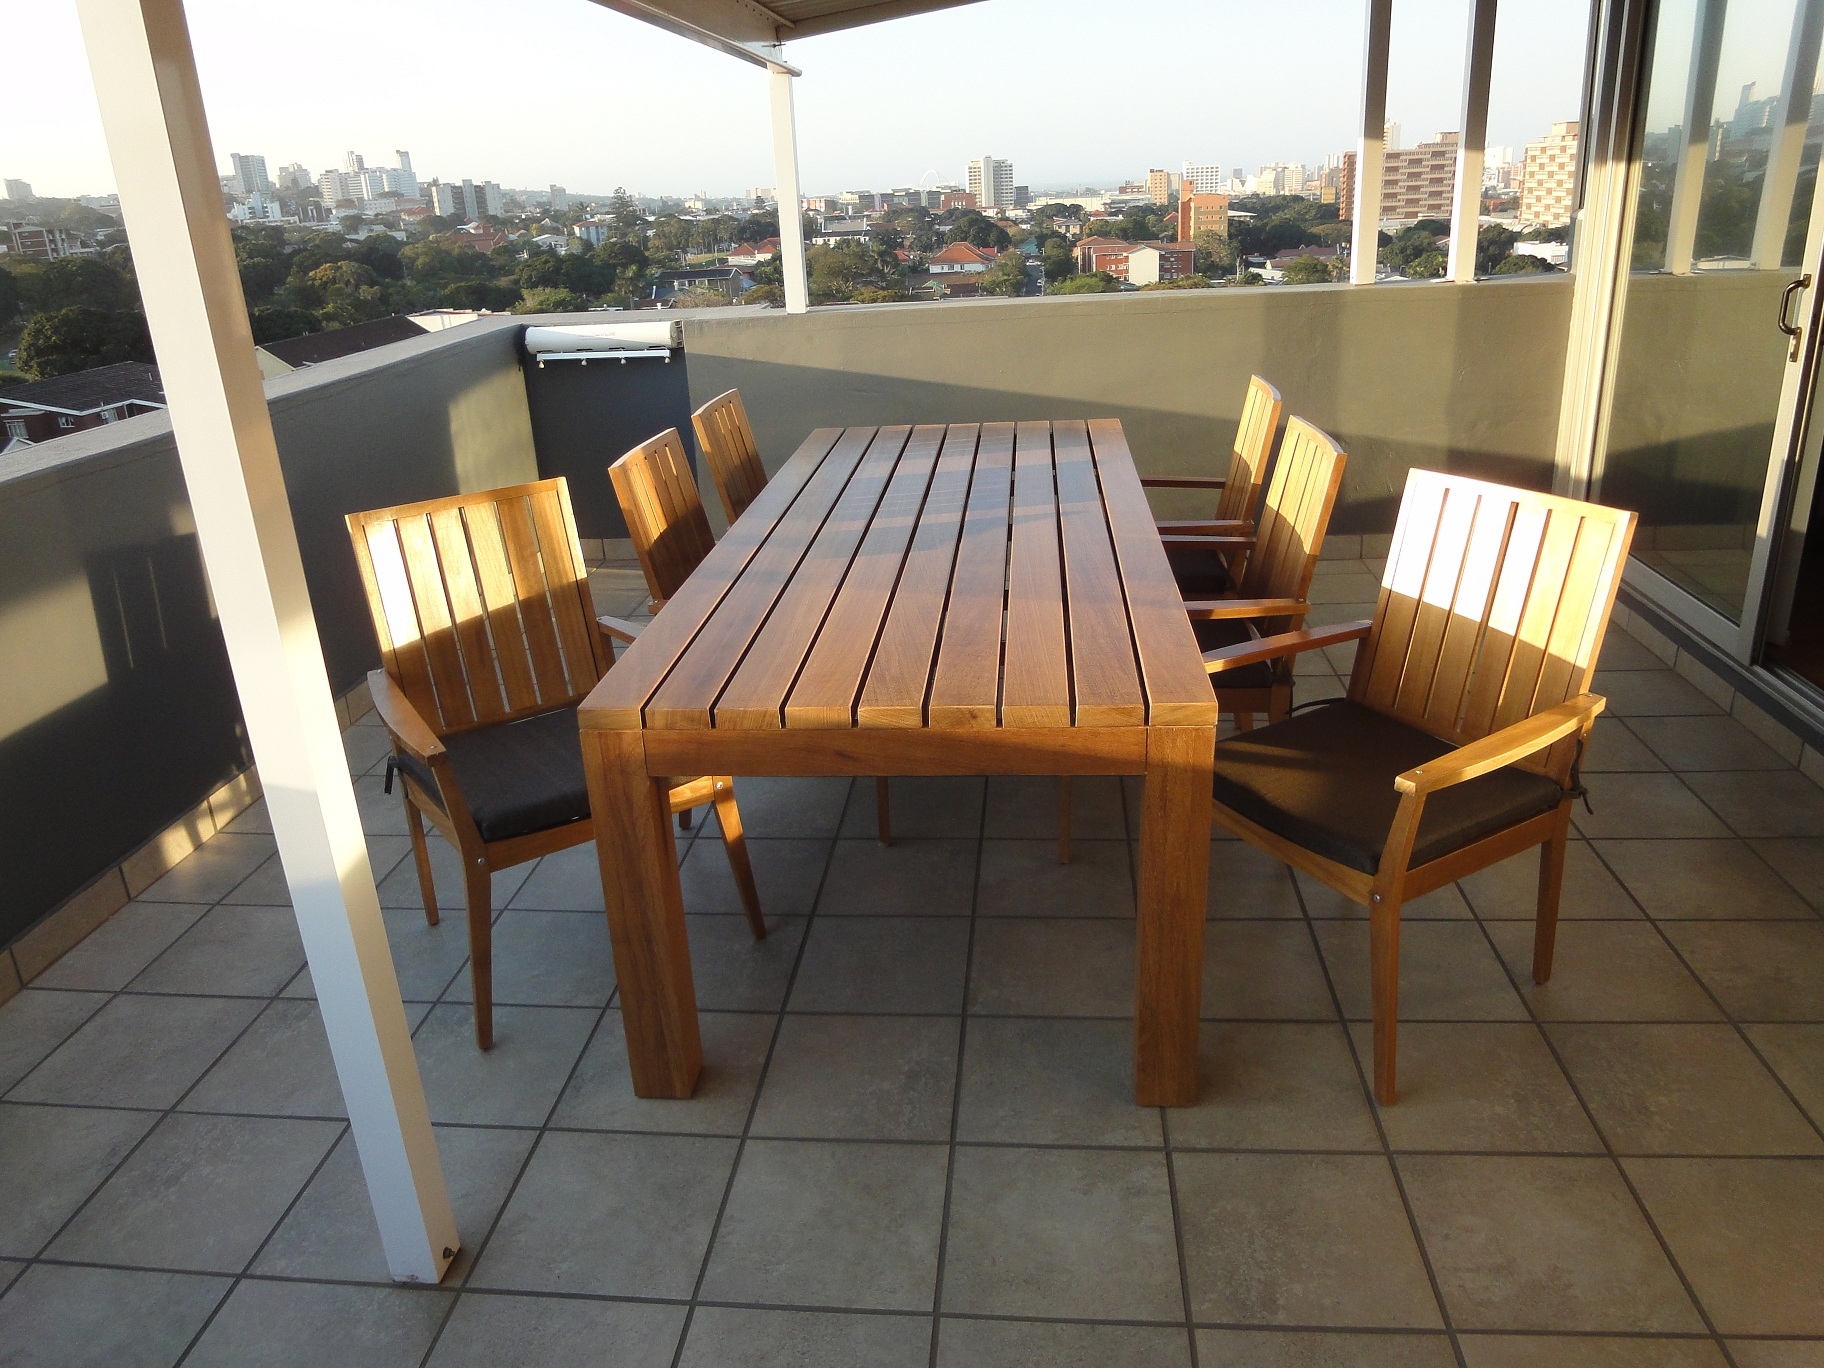 Iroko Outdoor Patio Table Chairs Suite Creative Woodworx with regard to size 1824 X 1368